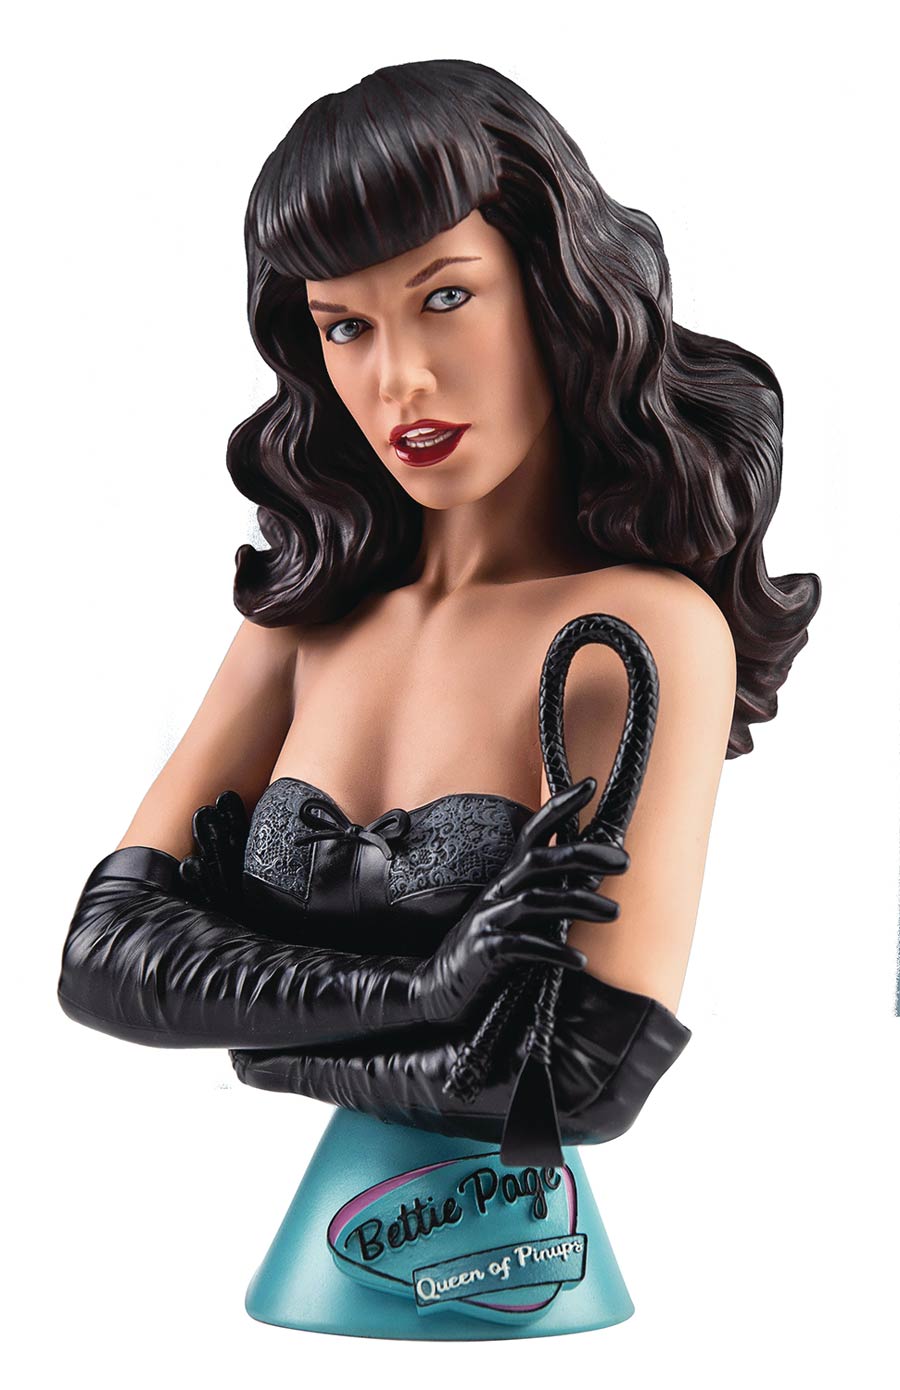 Bettie Page Queen Of Pinups (Naughty Bettie) 3/4 Scale Bust